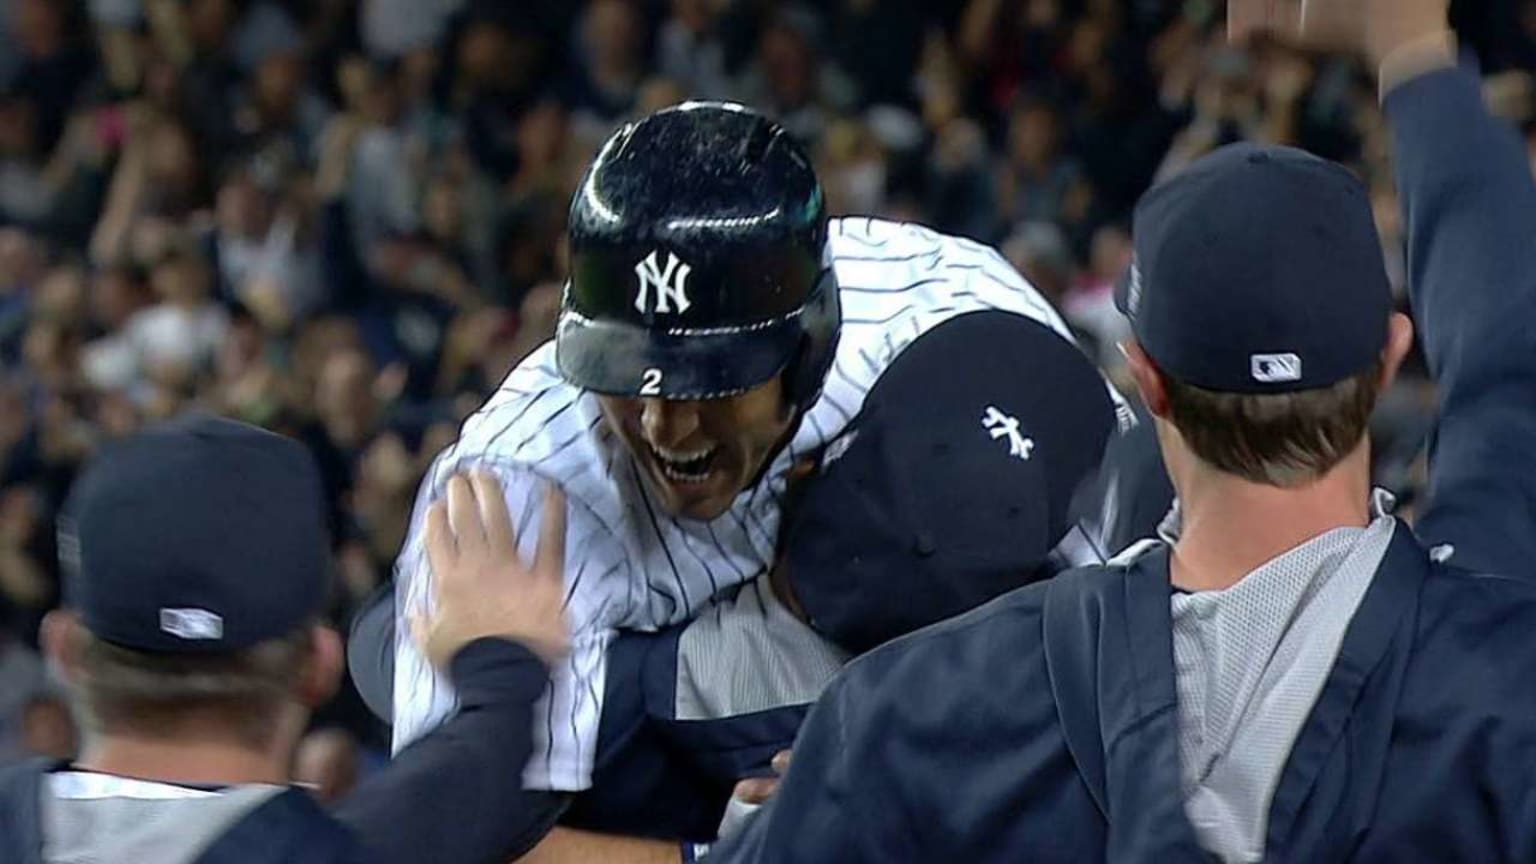 September 25, 2014: Yankees bid farewell to captain Jeter with walkoff win  – Society for American Baseball Research